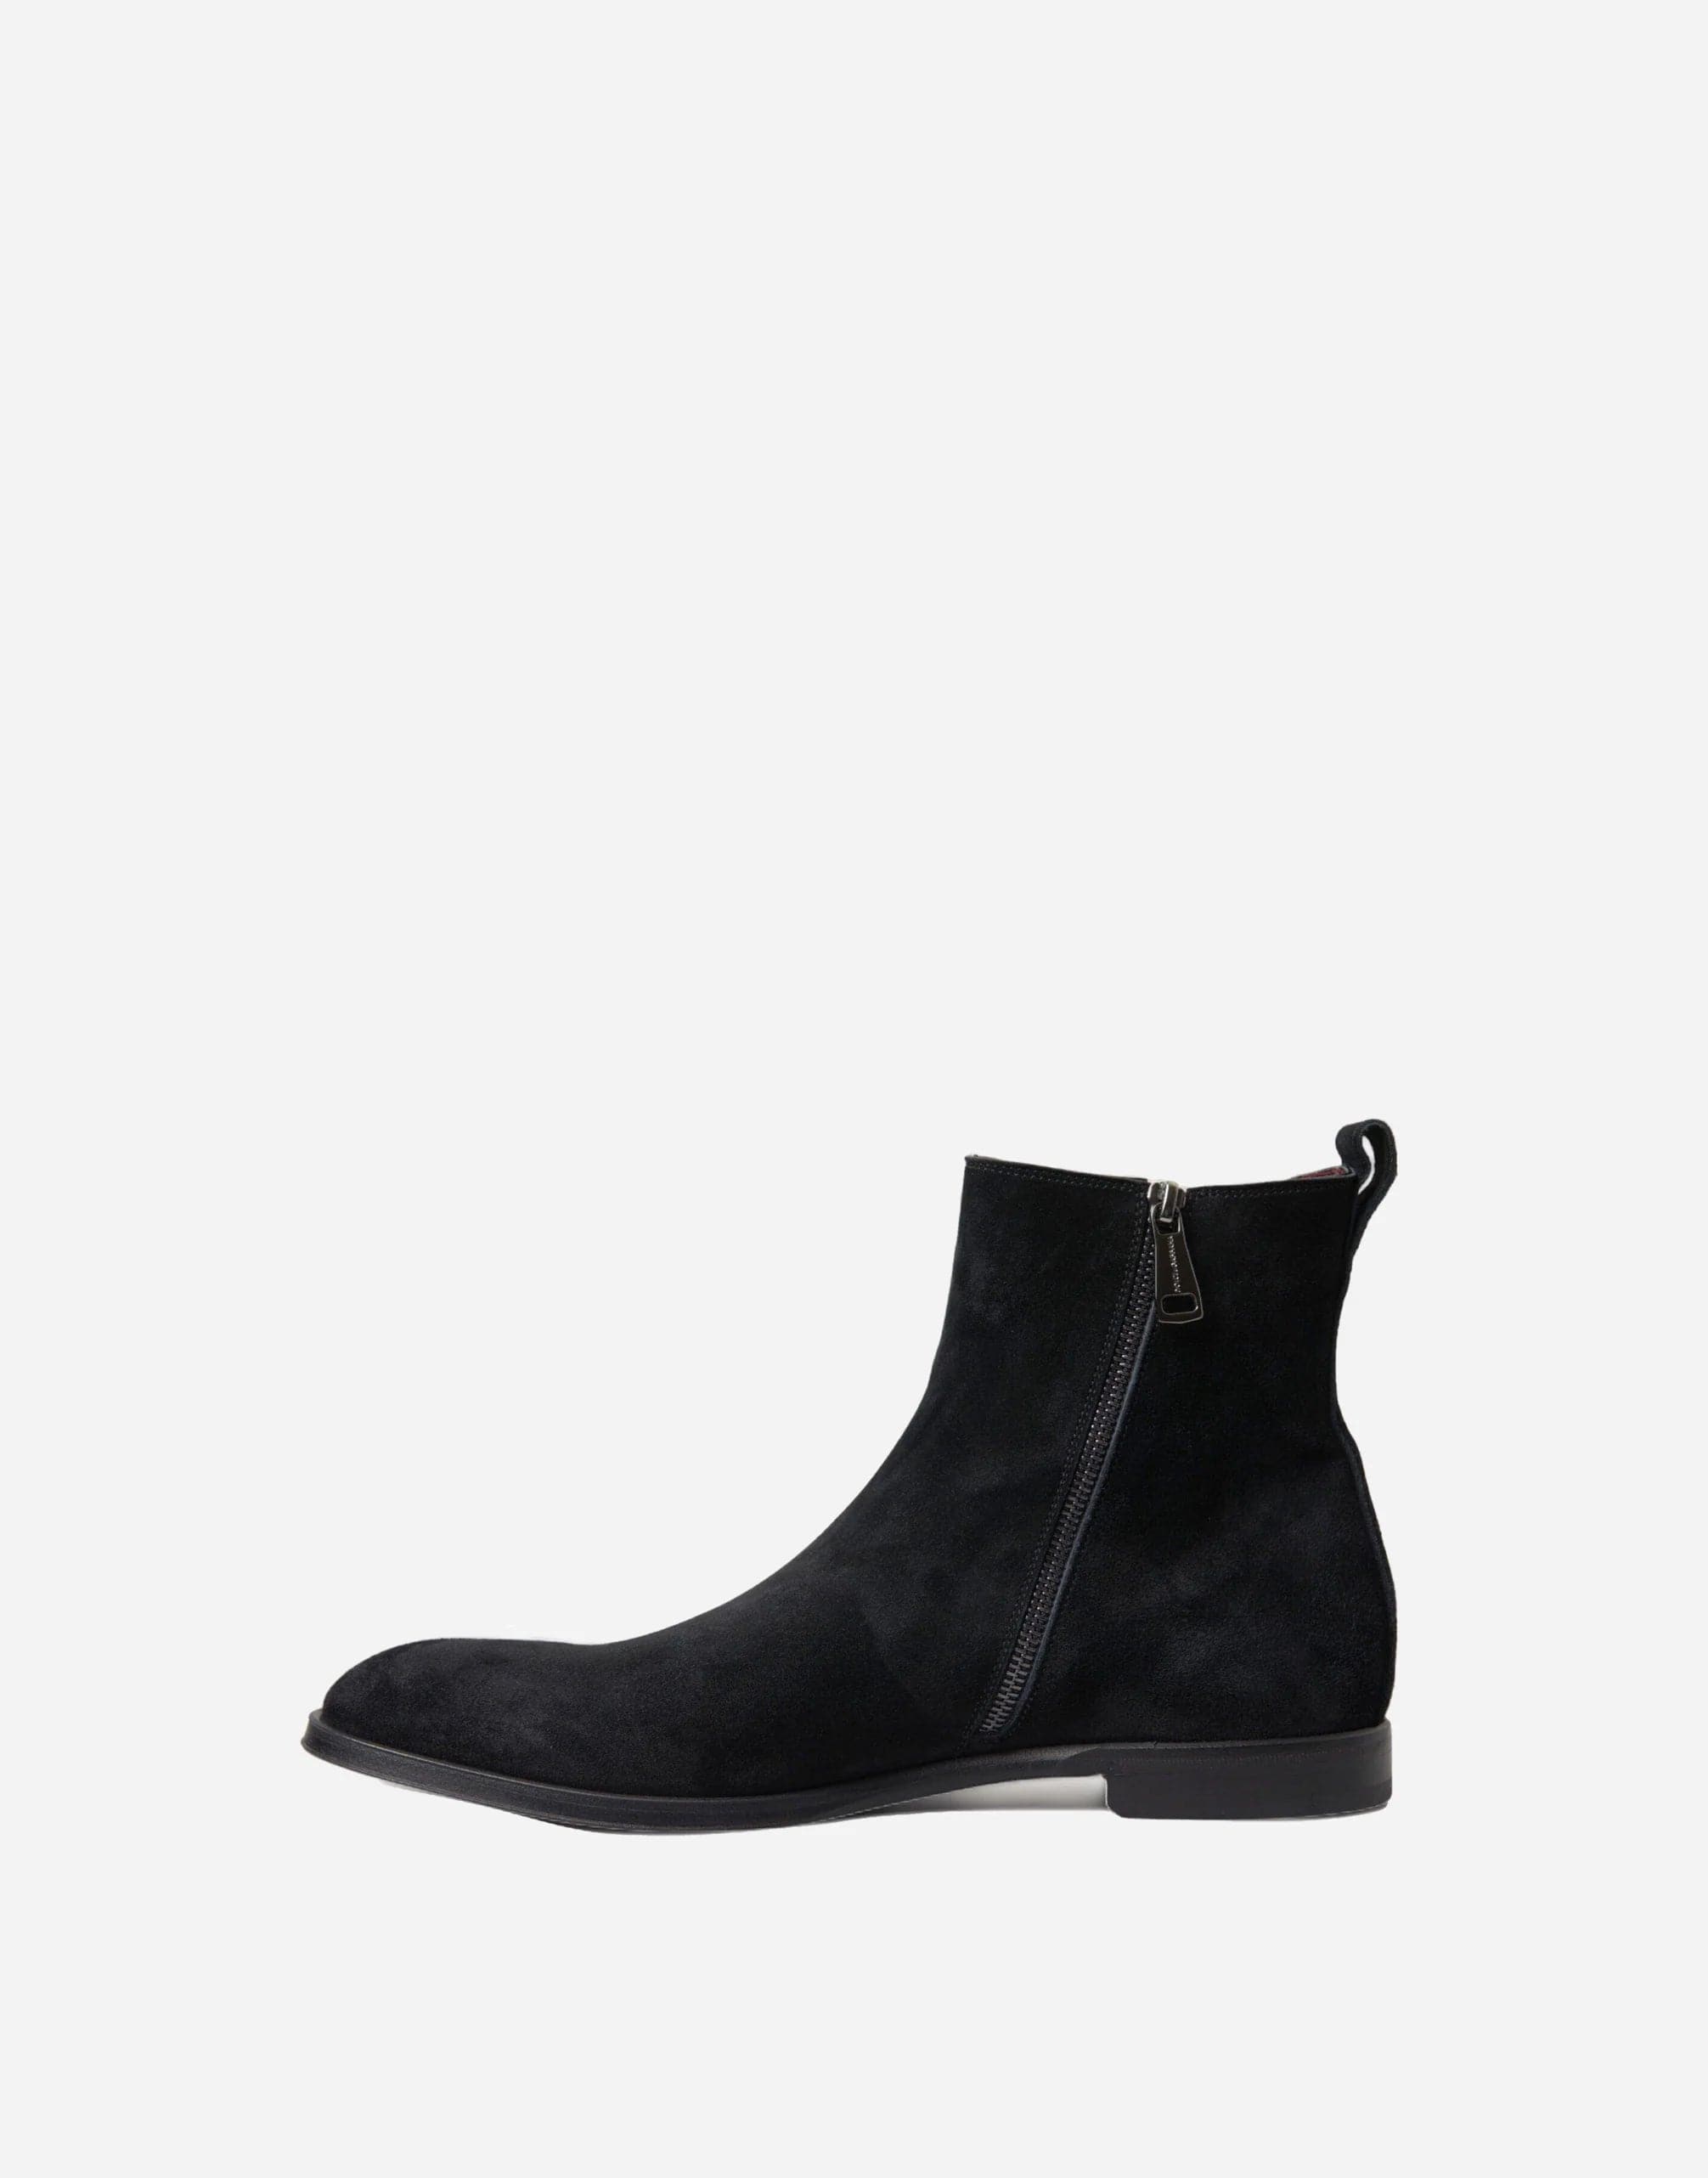 Suede Leather Ankle Boots